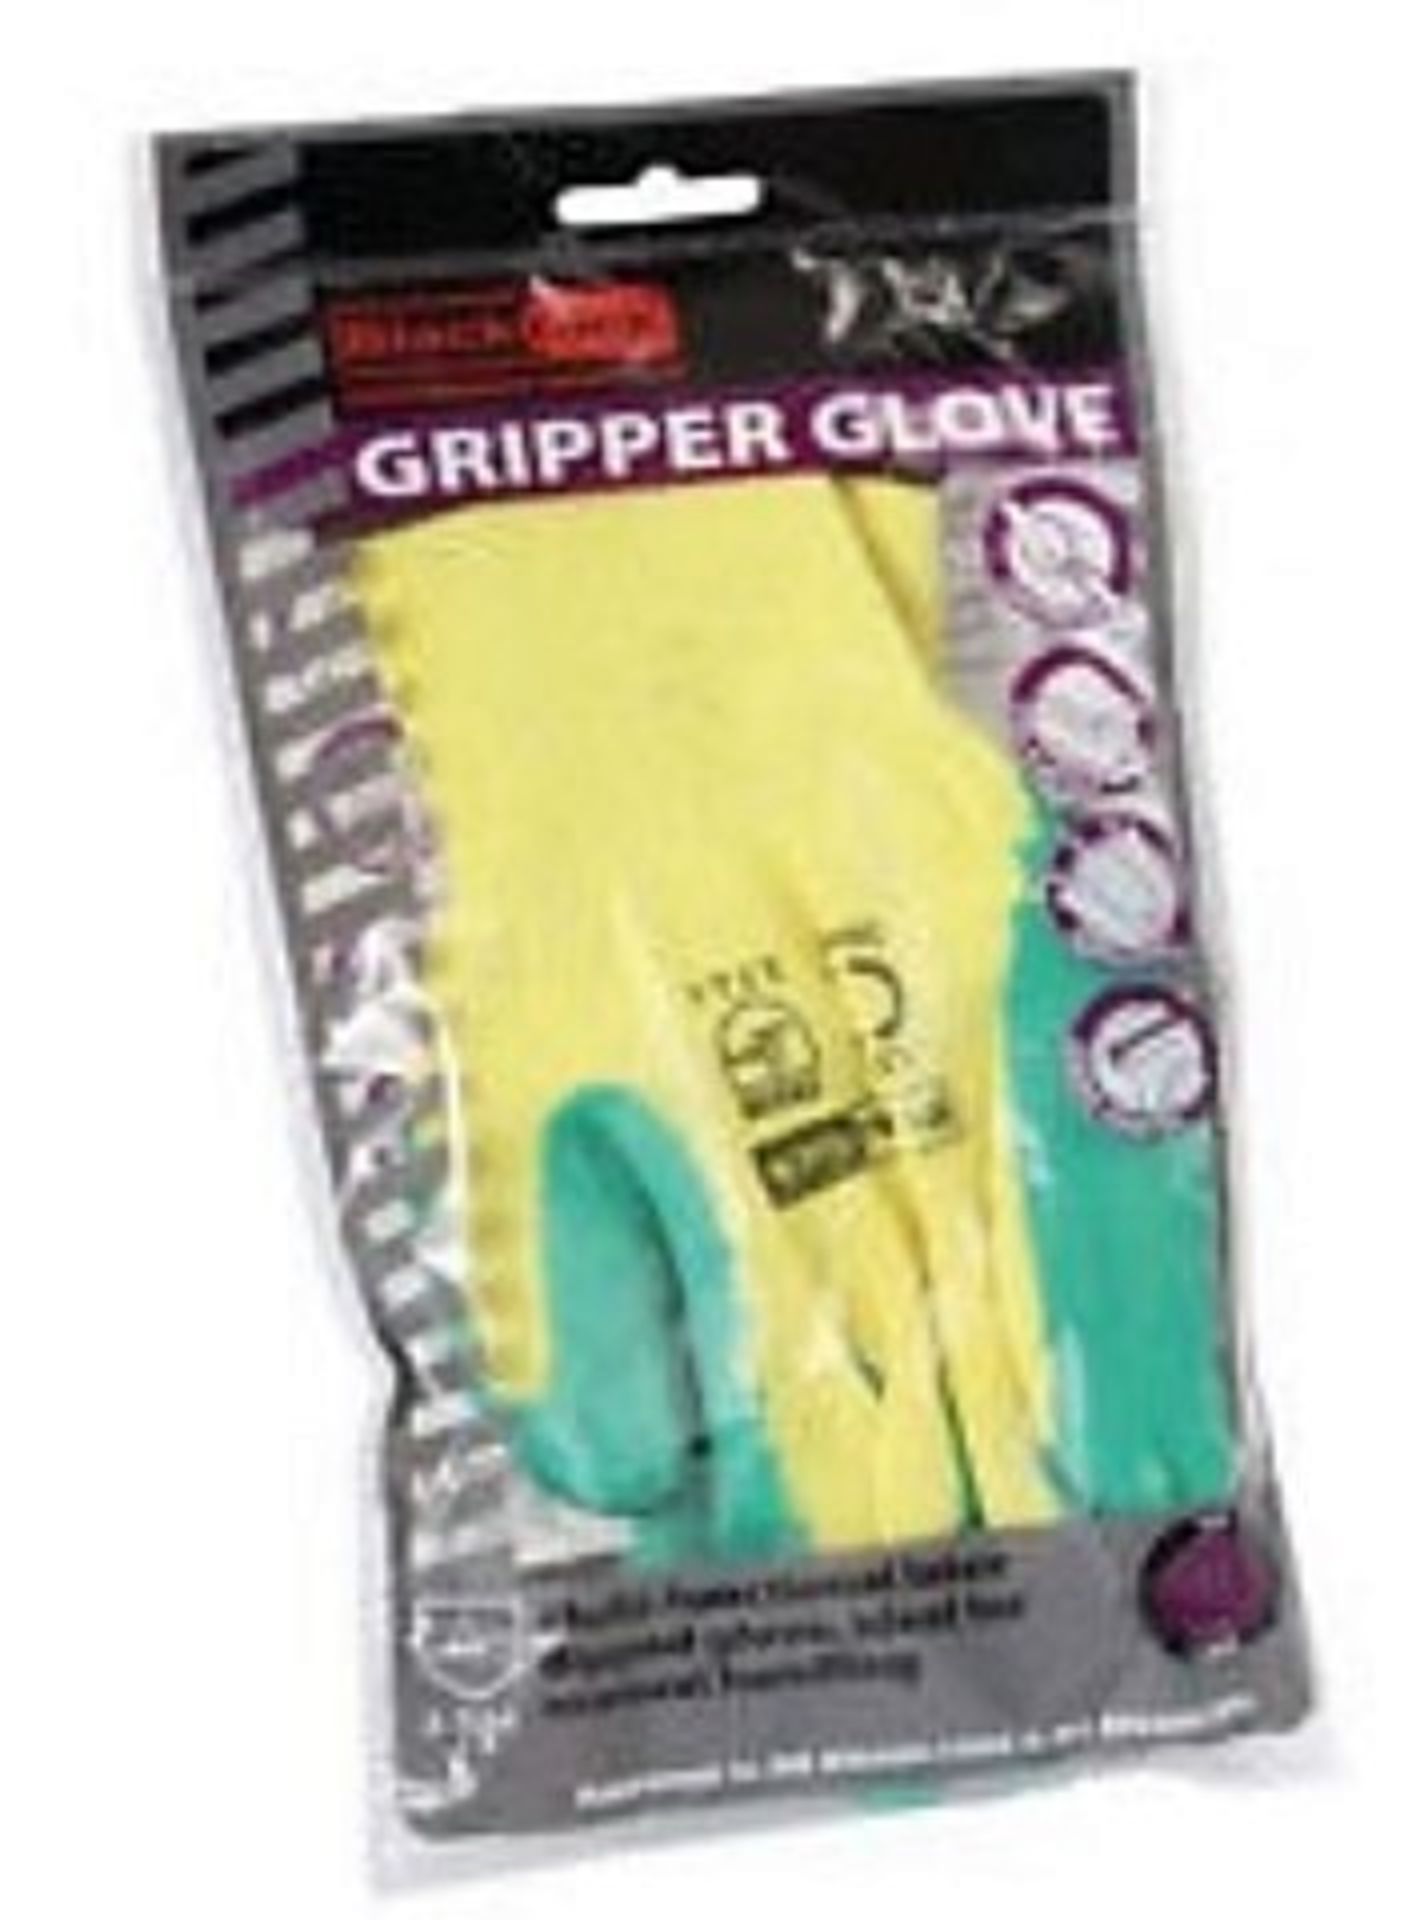 30 x Pairs Of BLACKROCK Heavy Duty Gripper Gloves - Size 11 - New/Unused Stock - Recent PPE Workwear - Image 2 of 2